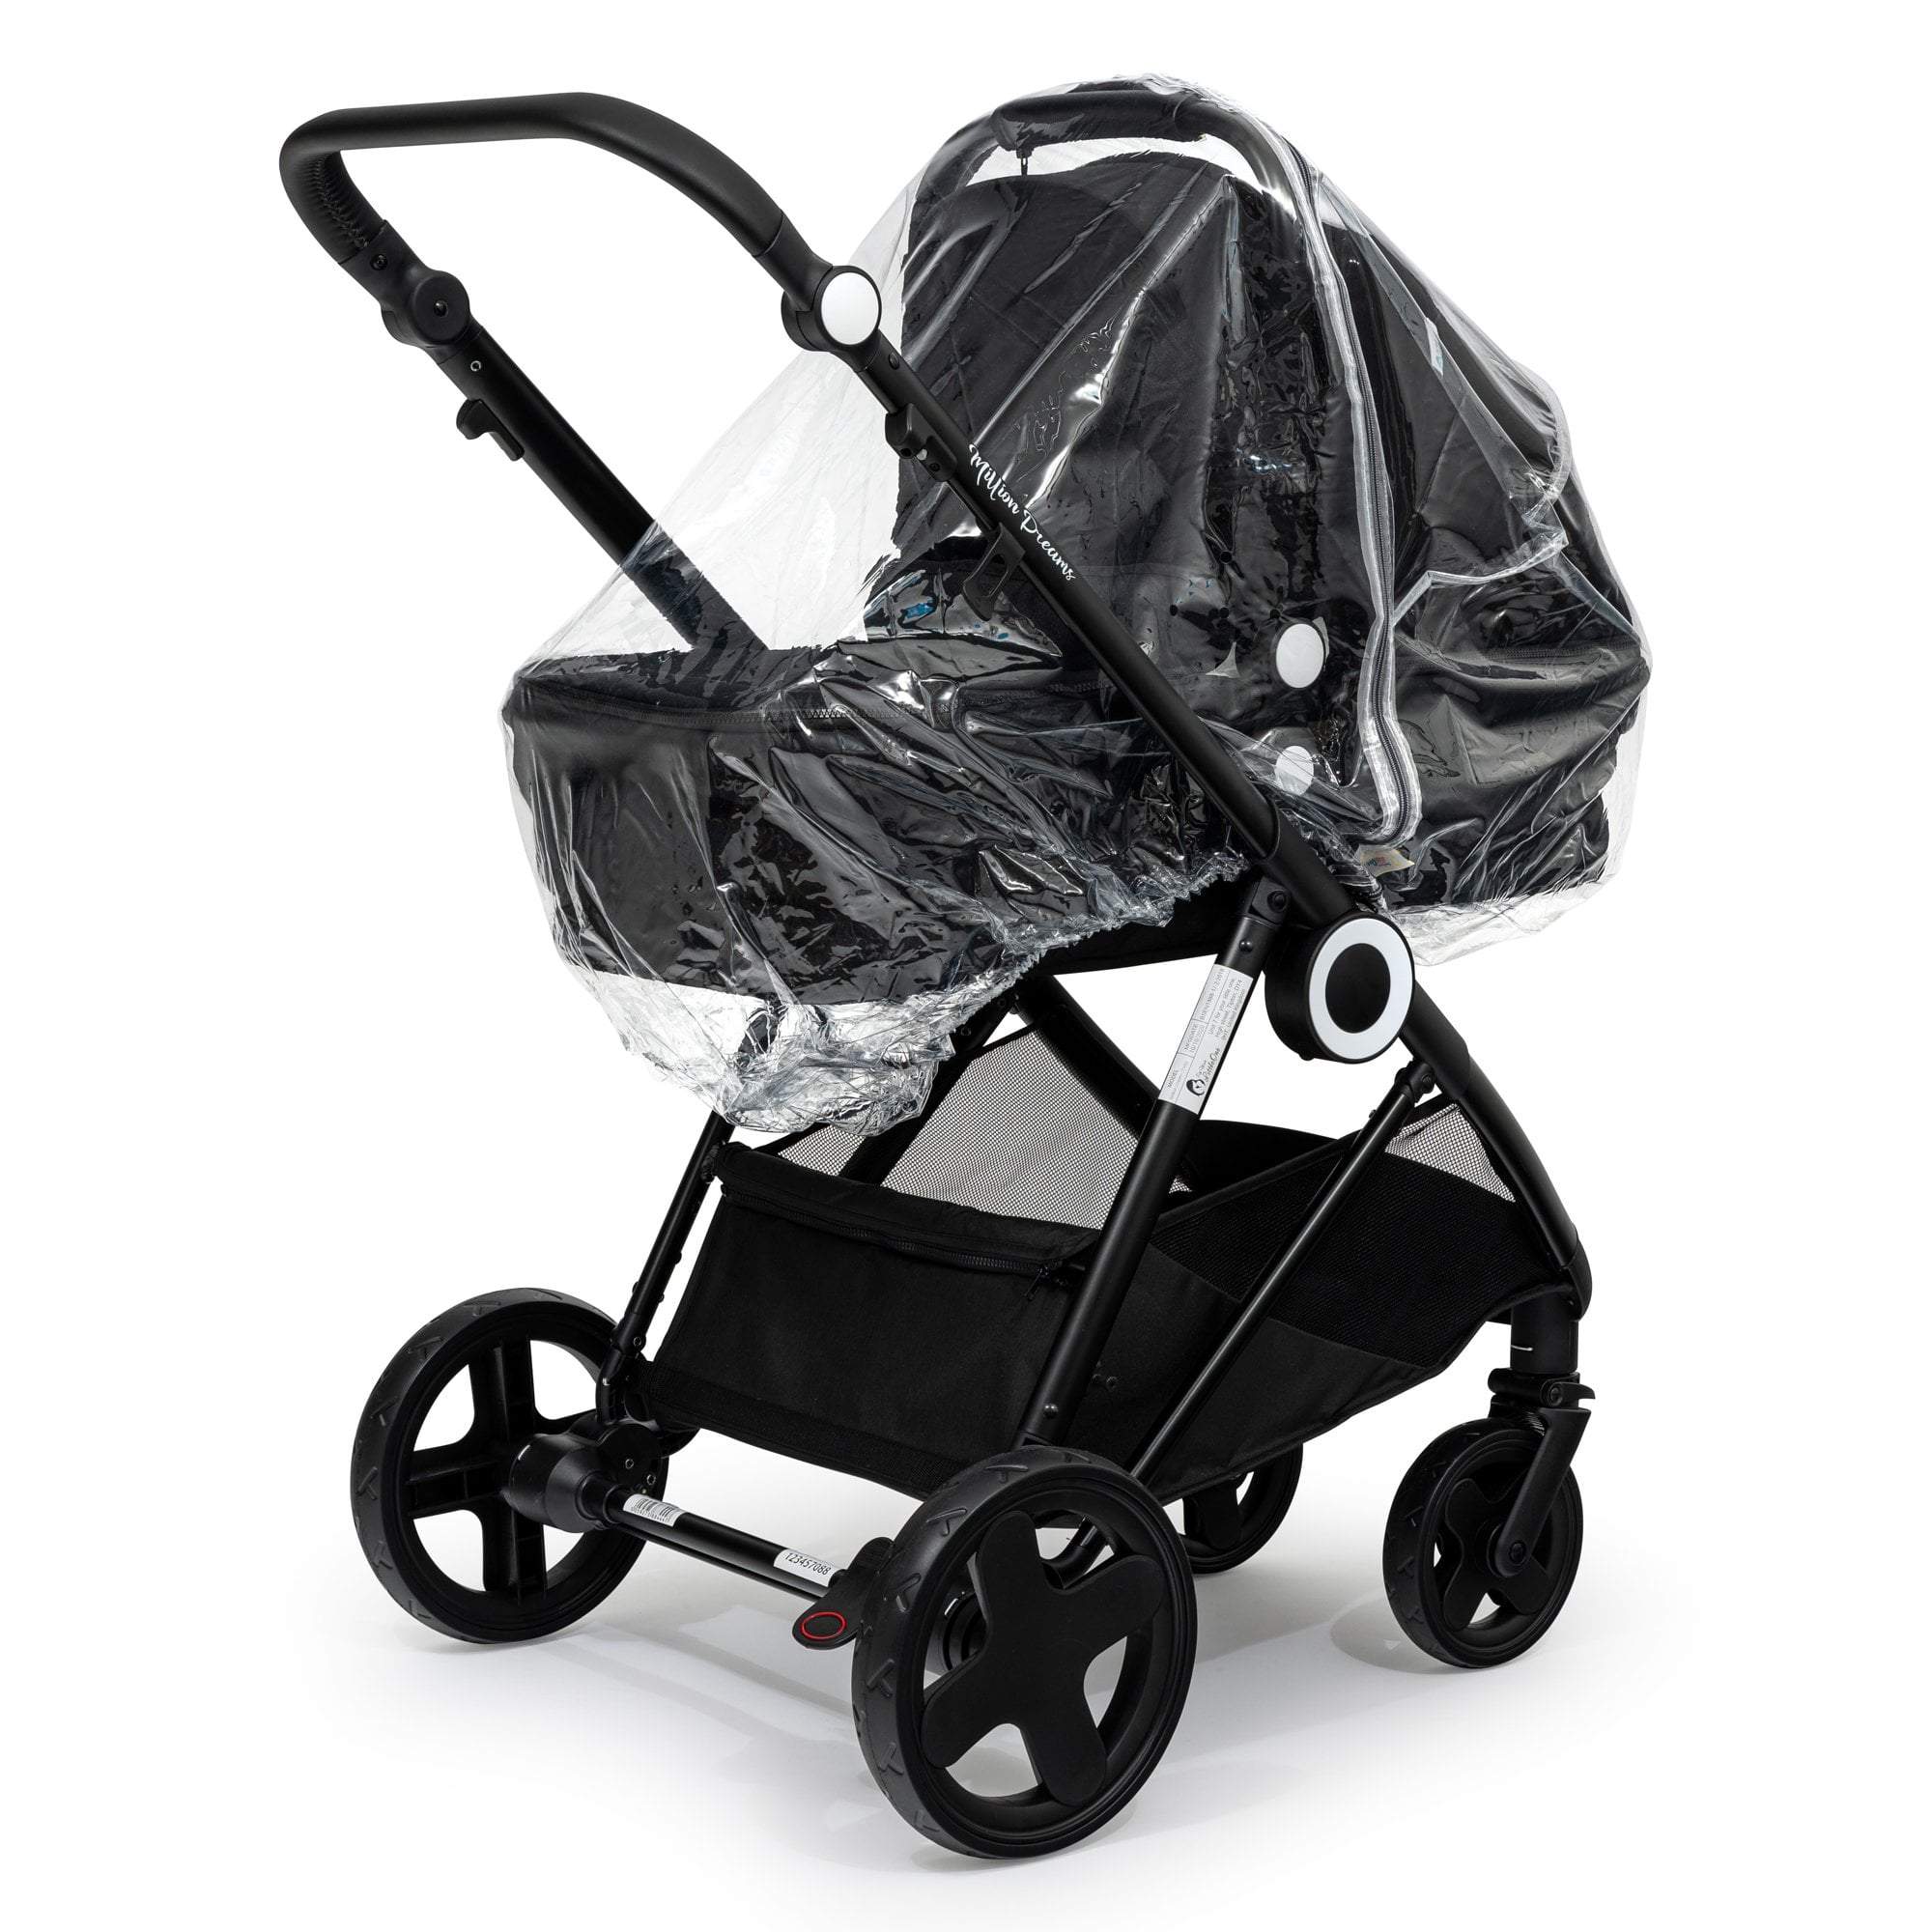 Carrycot Raincover Compatible With Urban Detour - Fits All Models - For Your Little One